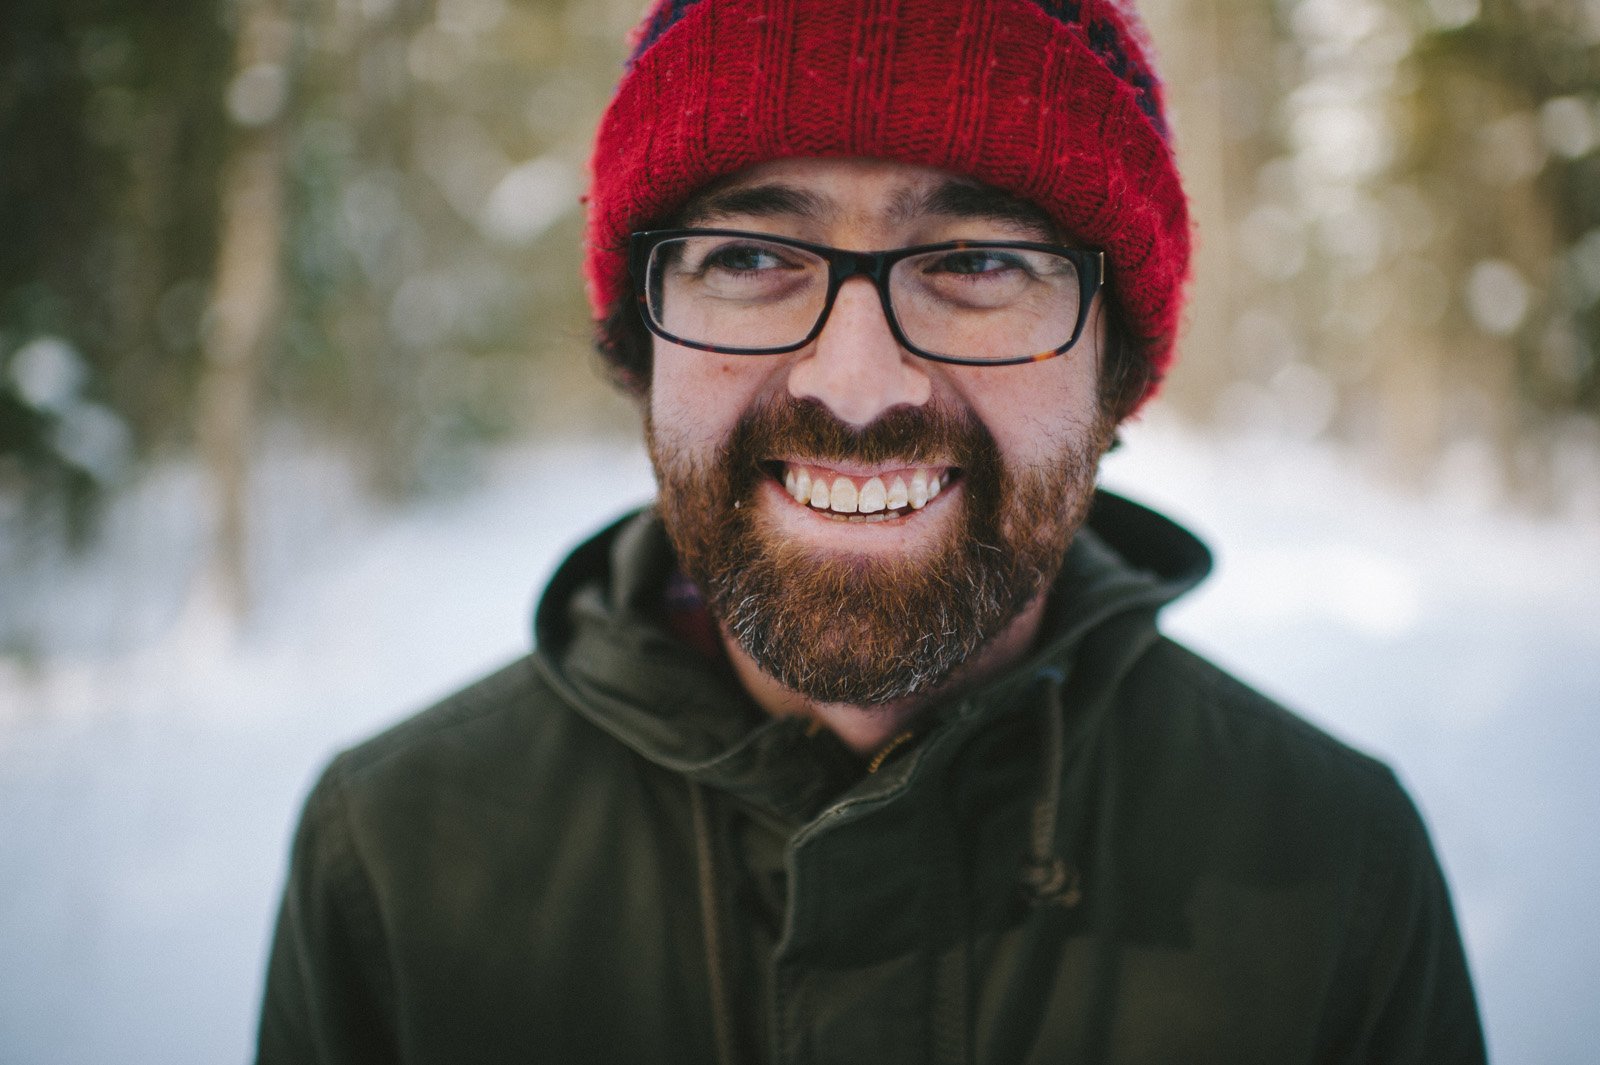 red and white beard | documentary travel photographers | winterscape photography